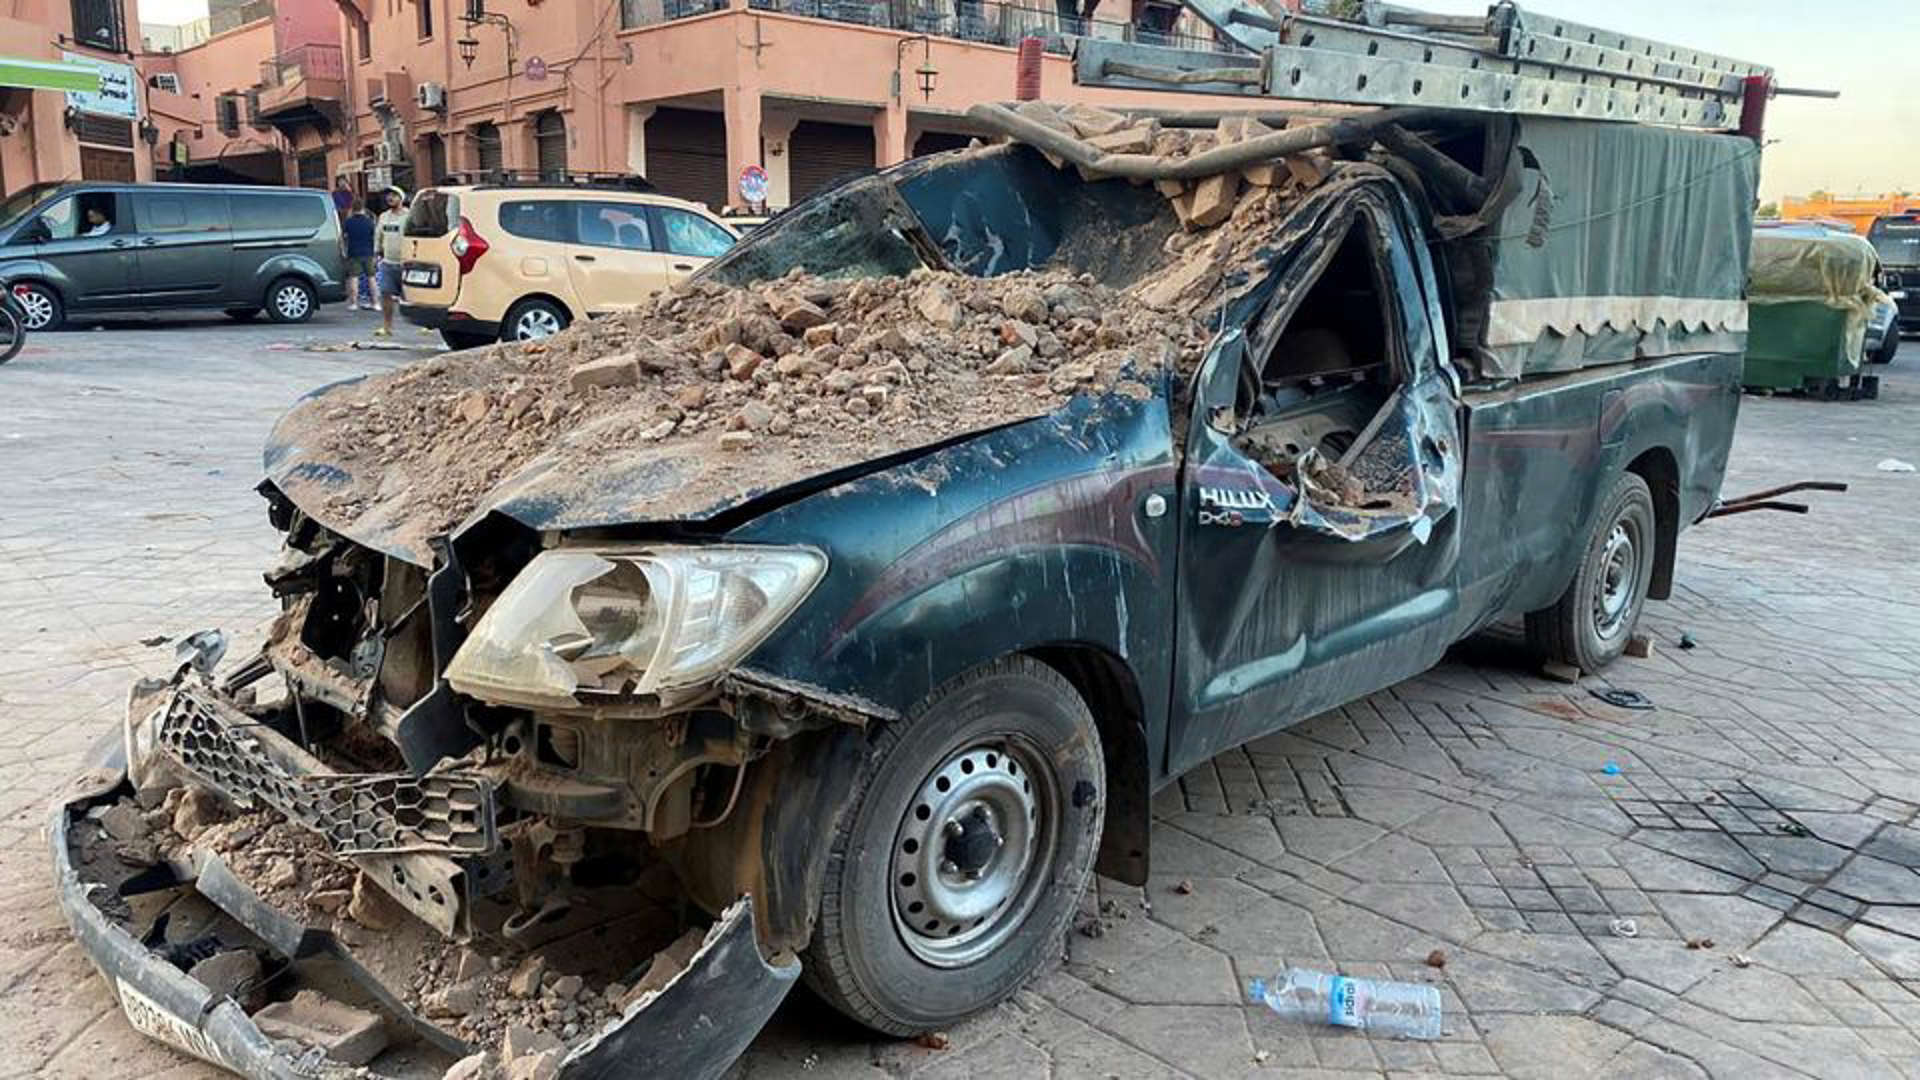 A damaged vehicle is pictured in the historic city of Marrakech on Saturday. - Abdelhak Balhaki/Reuters